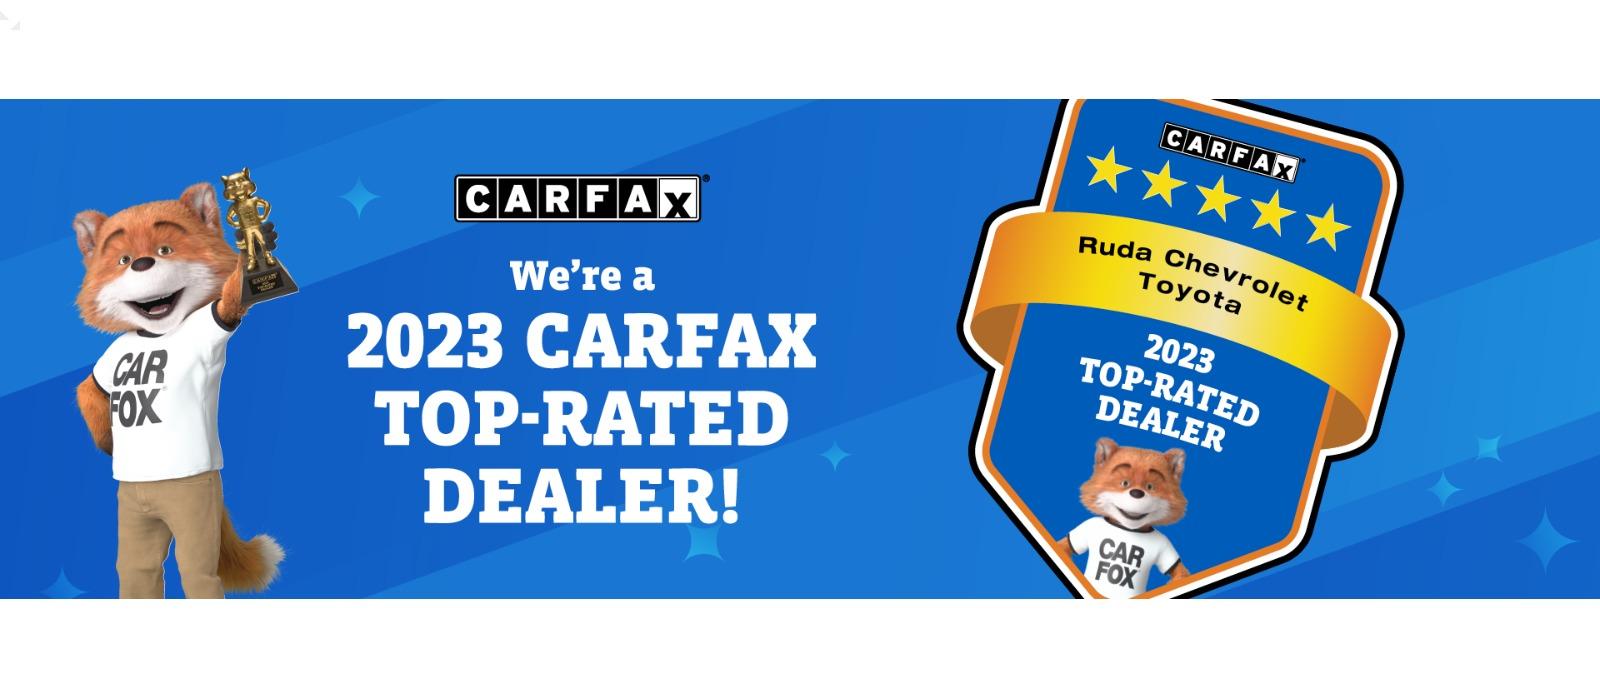 WE'RE A CARFAX 2023 TOP-RATED DEALER!